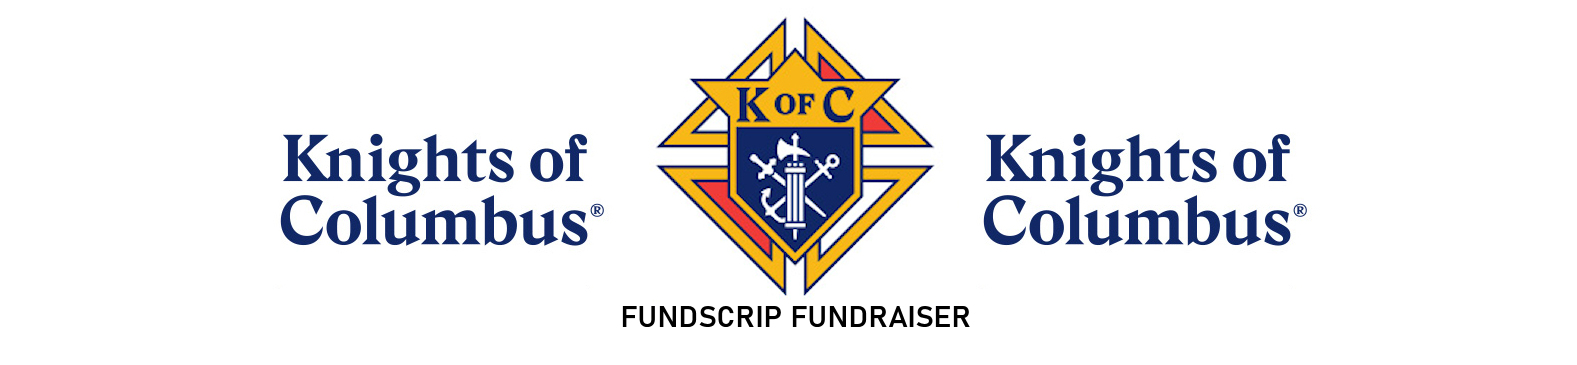 Knights of Columbus Fundraise